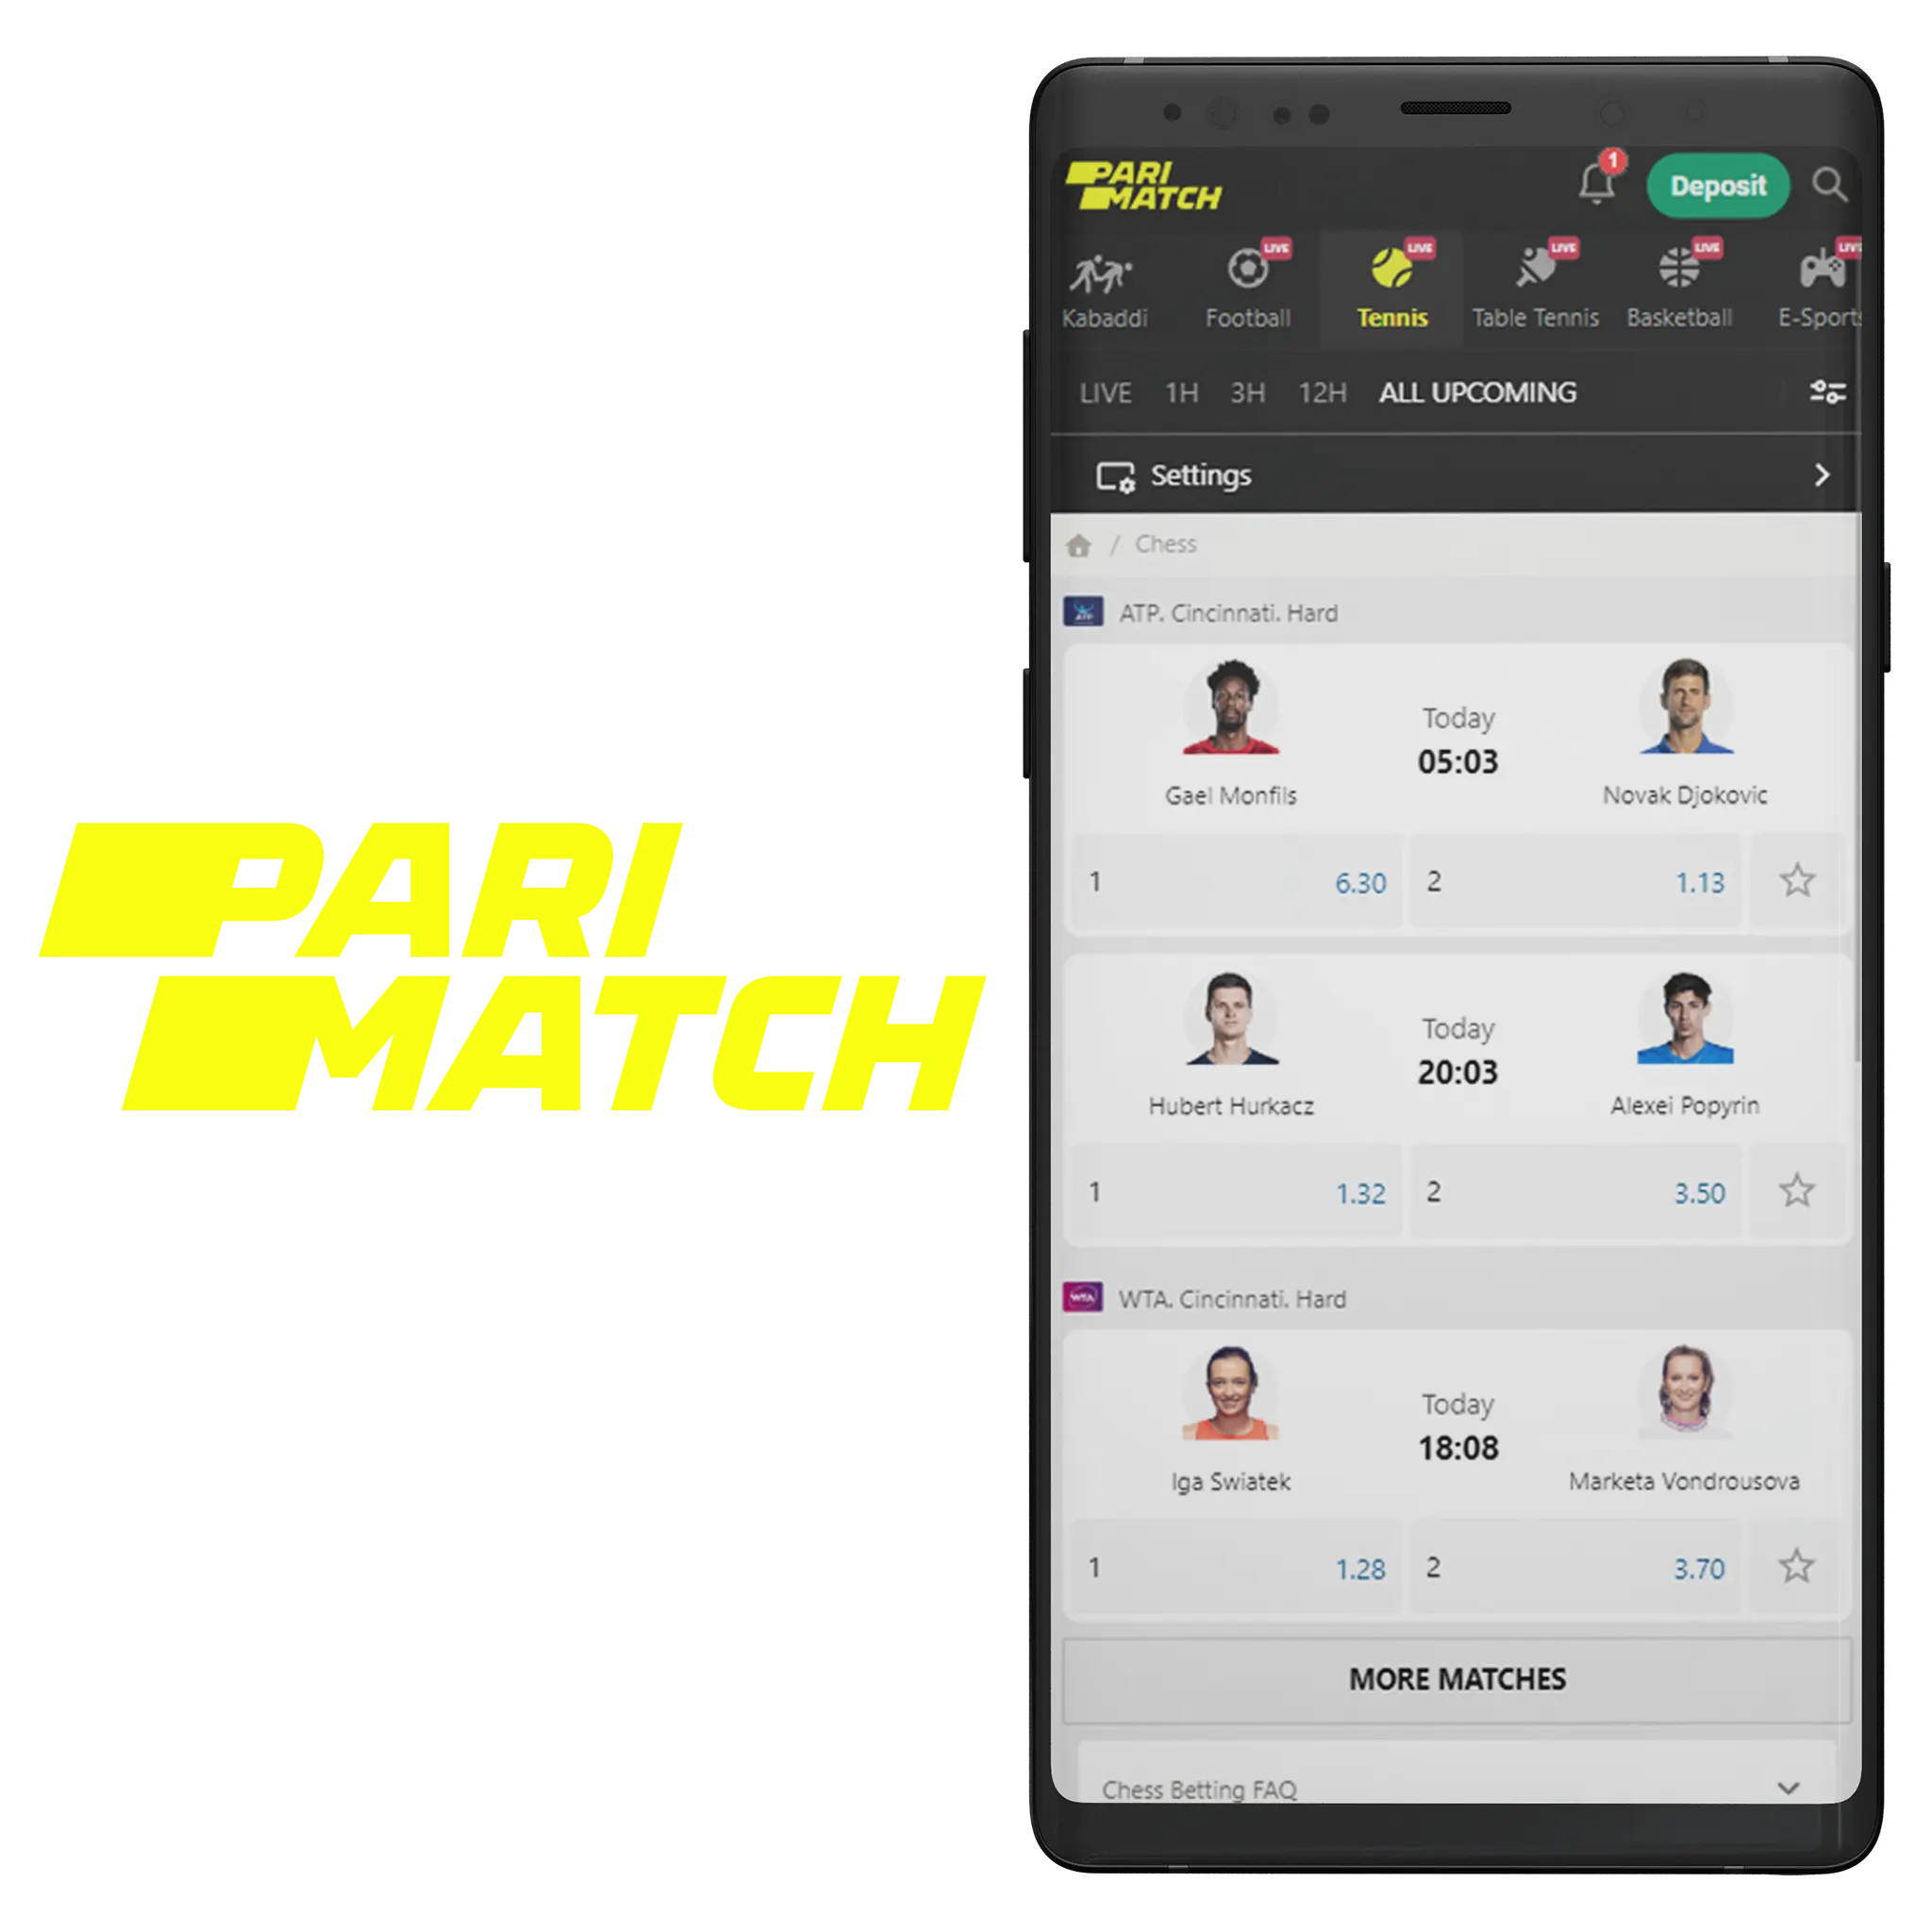 Parimatch mobile app is considered the best tennis betting app in India.